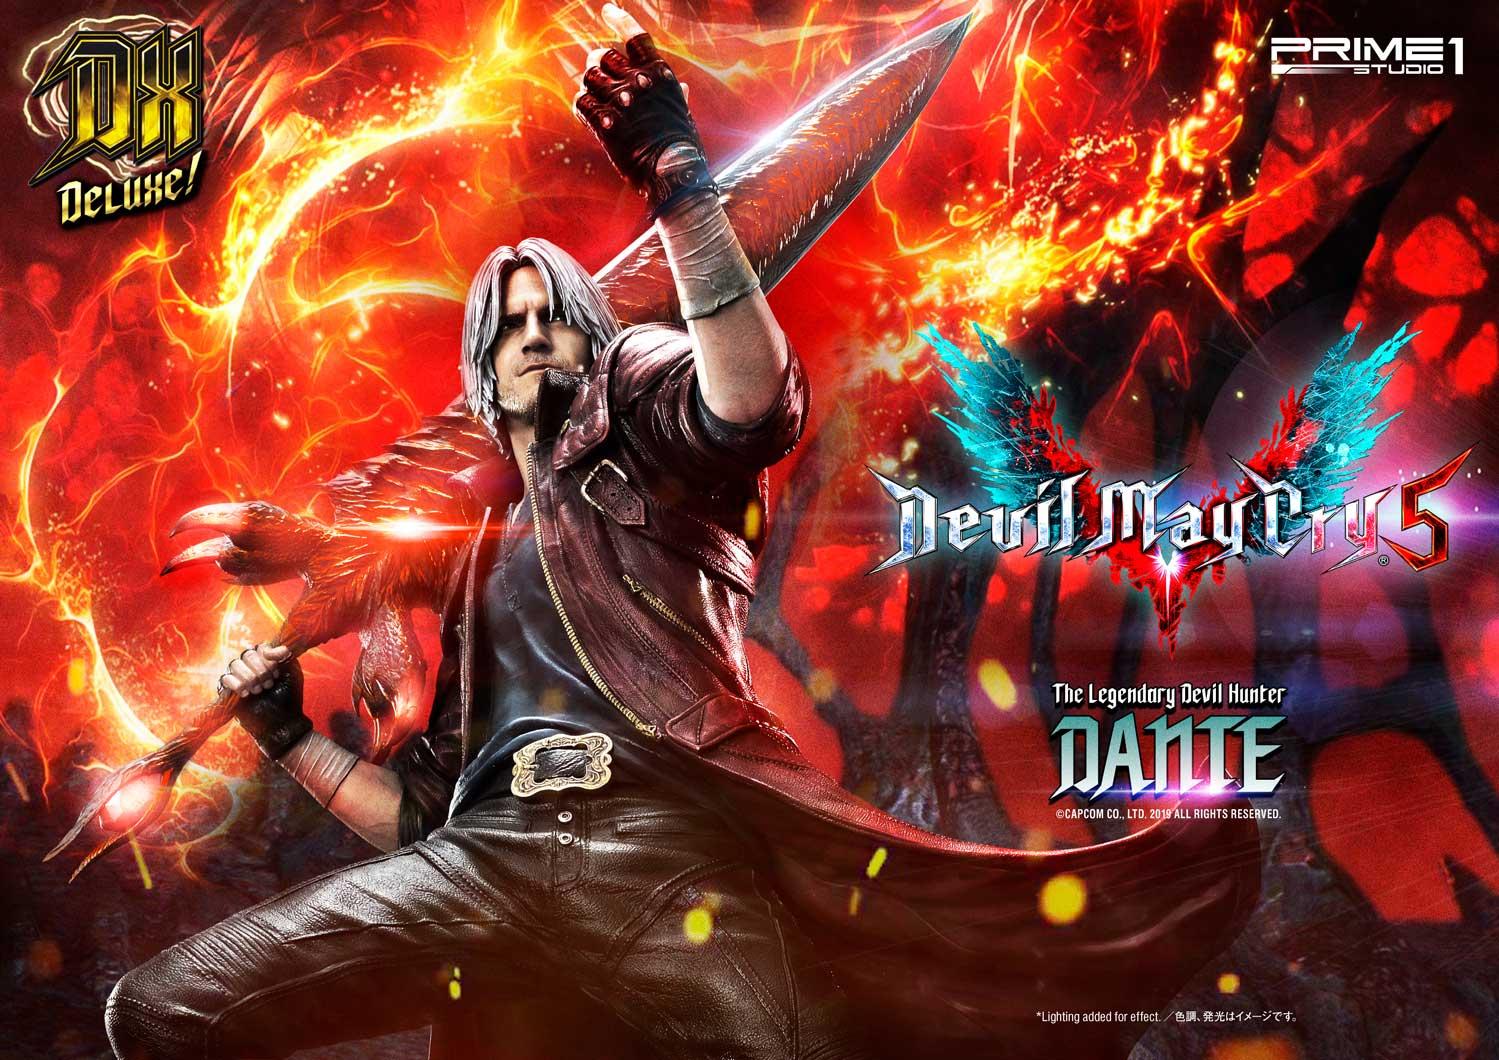 Stream Devil May Cry Anime OST - 01 - D.m.c. by Dante